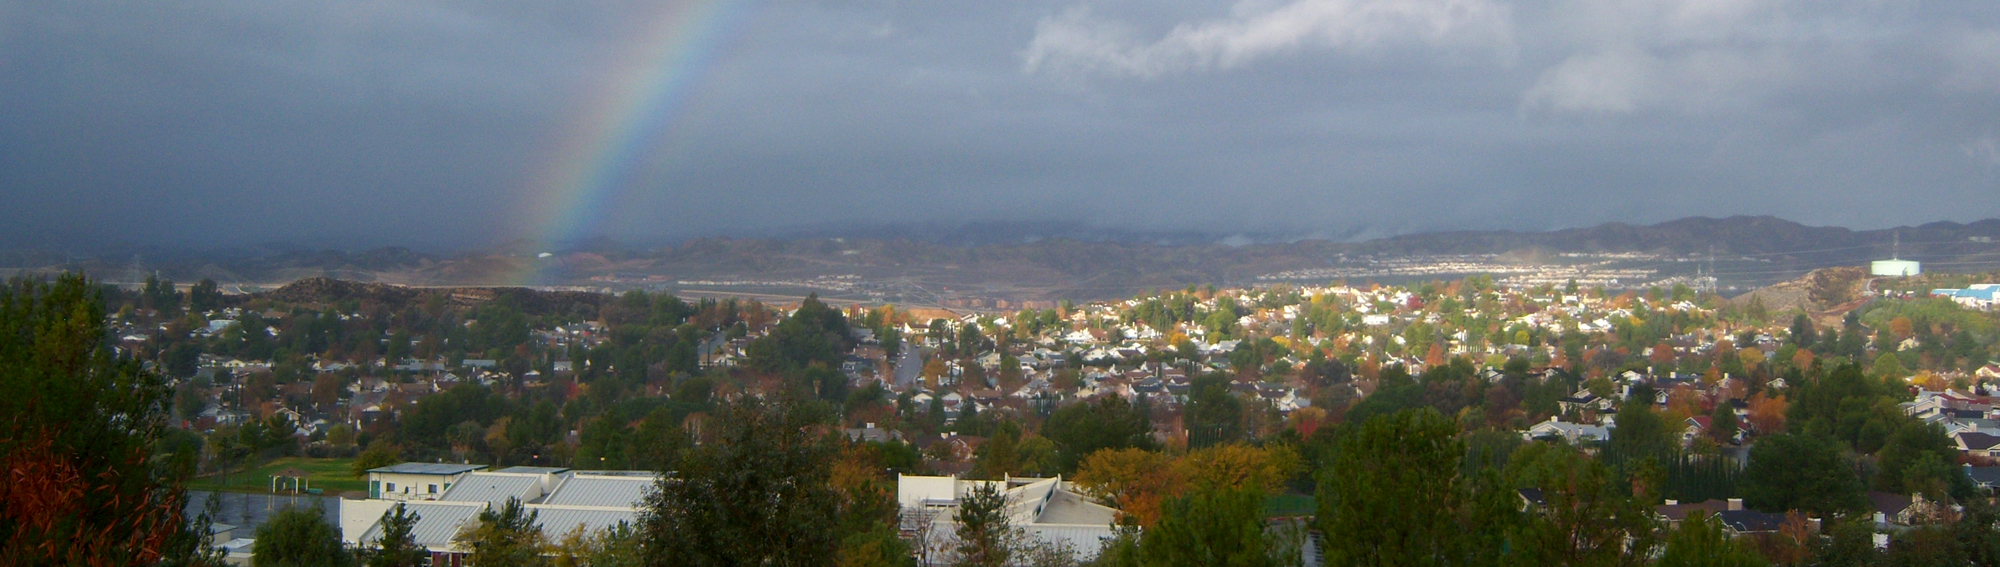 view of the town with a rainbow in the sky